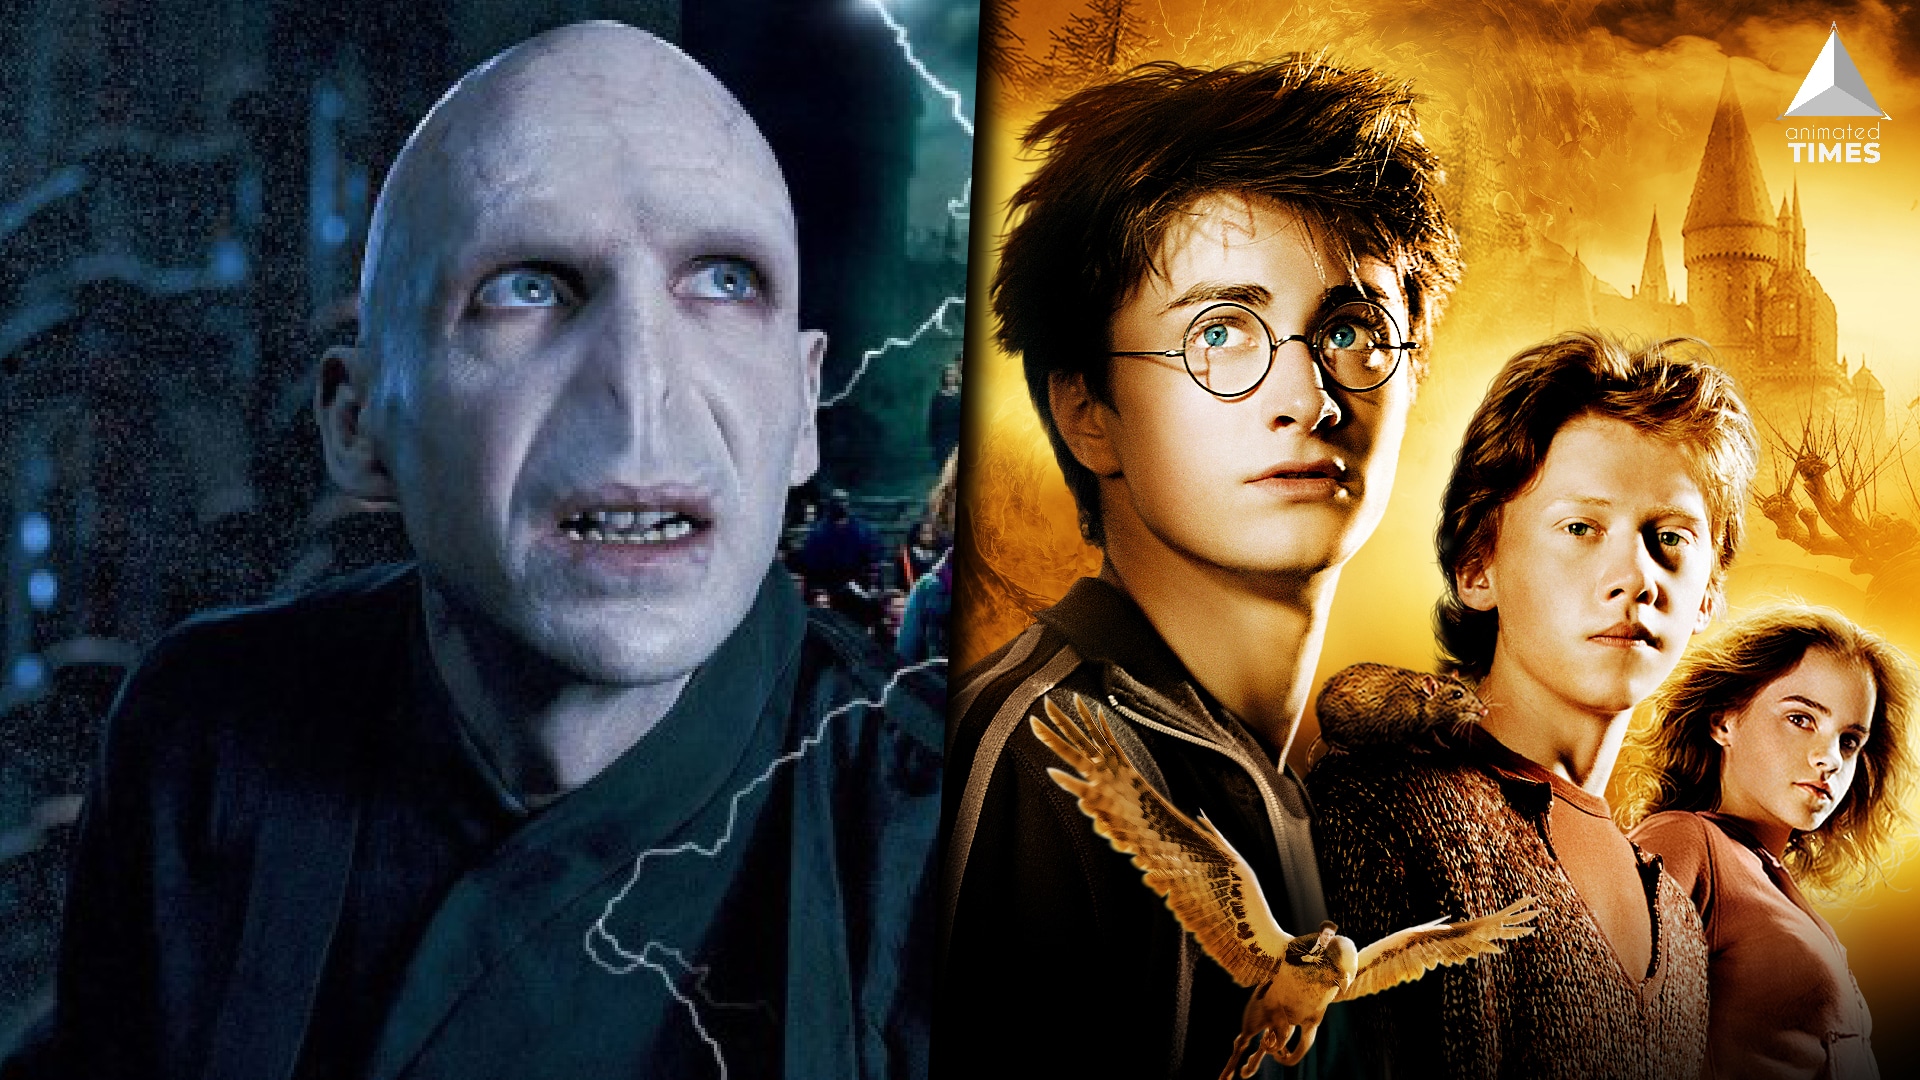 Prisoner of Azkaban : 10 Things You Didn’t Know About The Harry Potter Movie